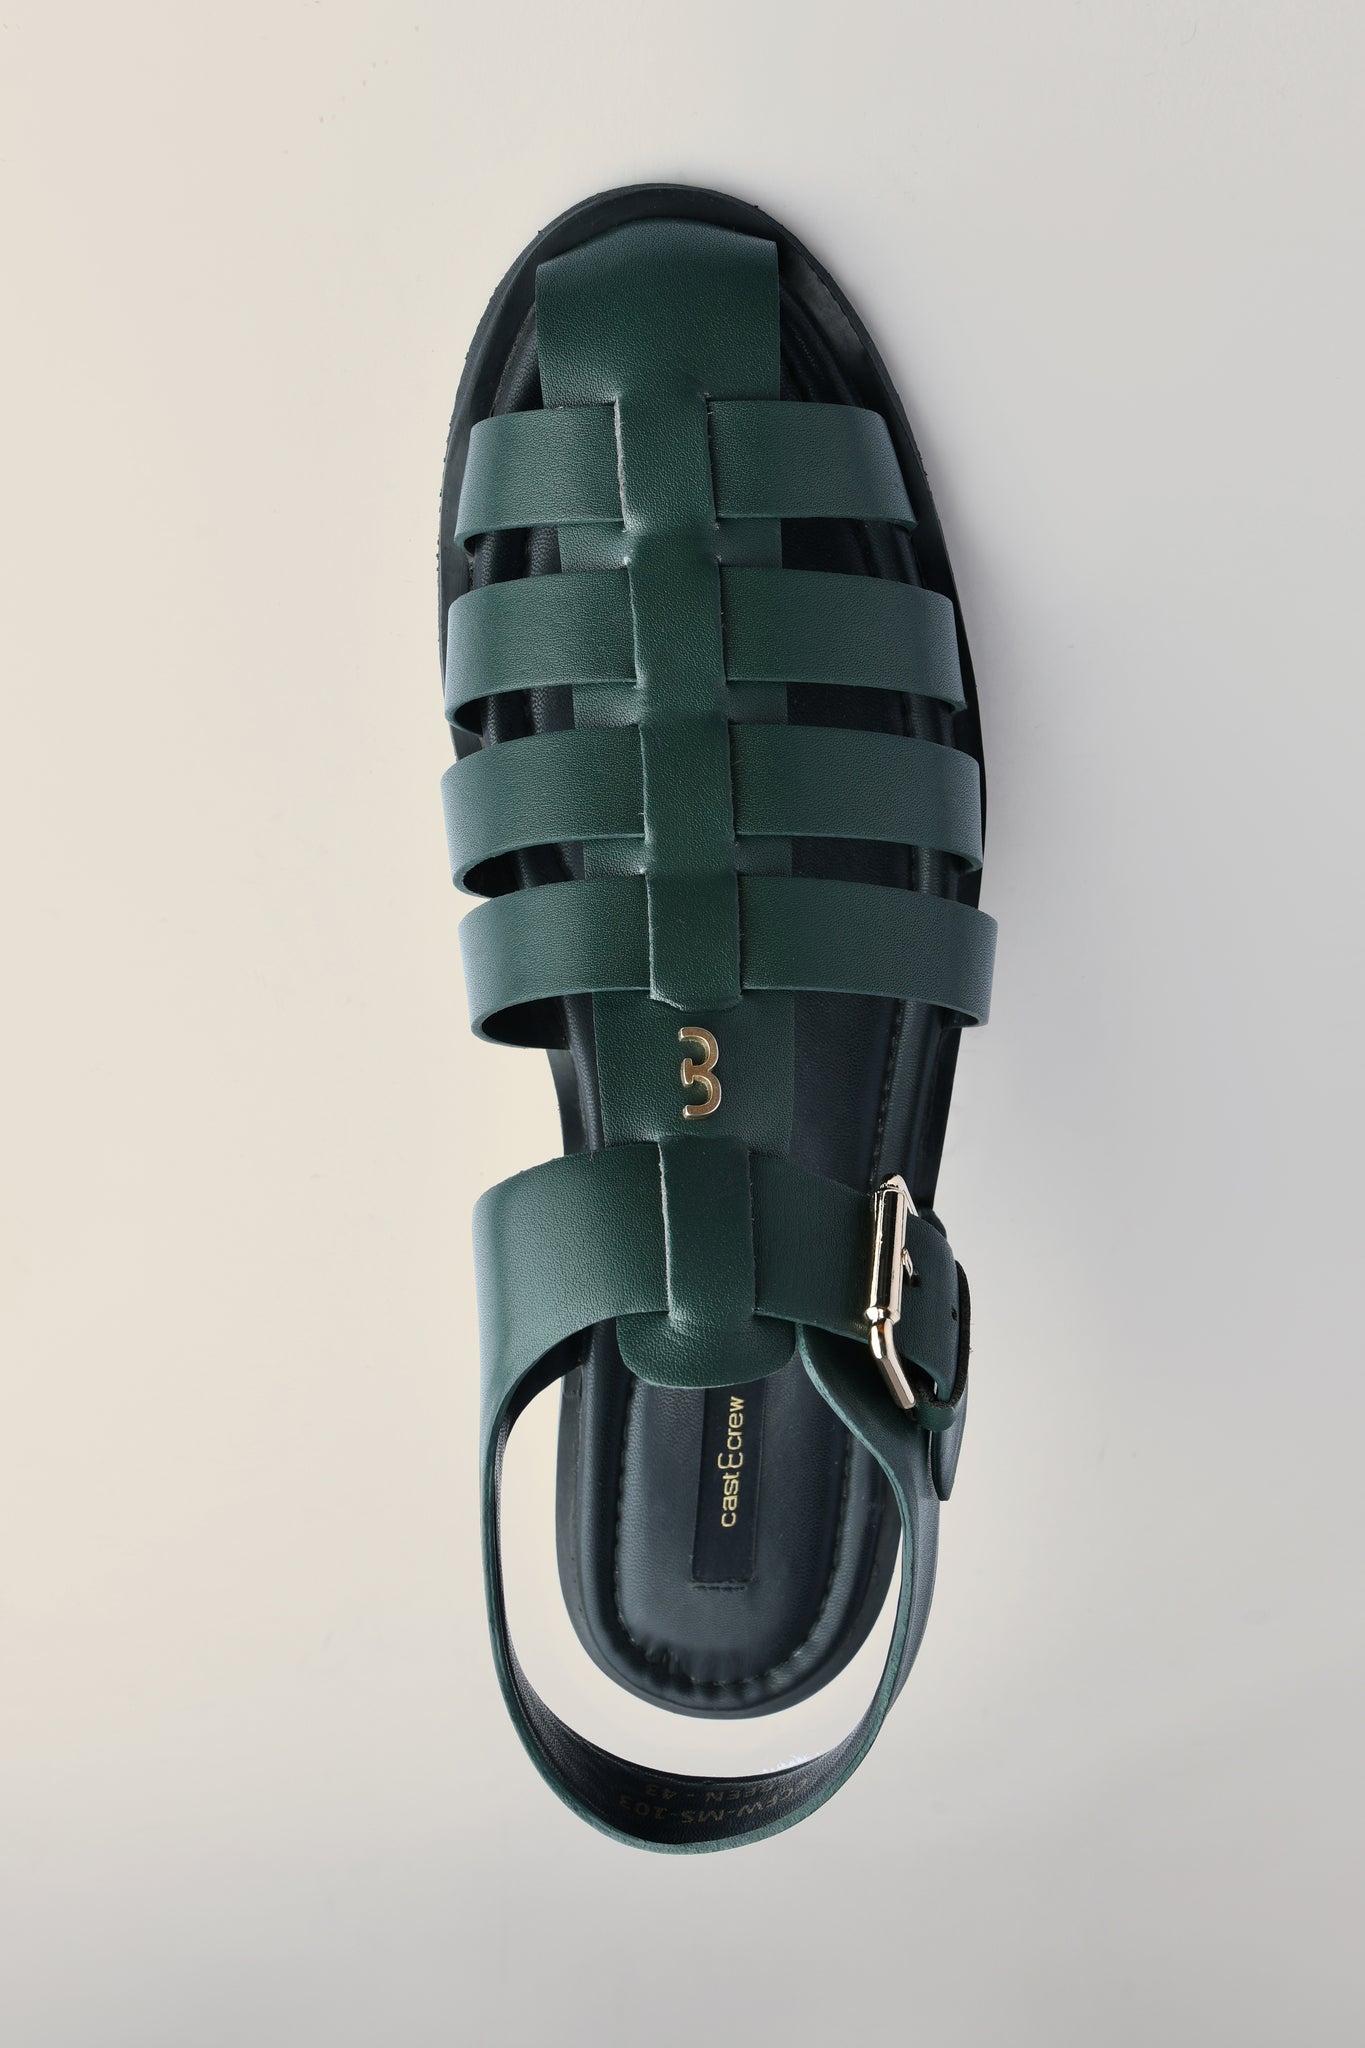 CASTLE - Green Leather Sandals